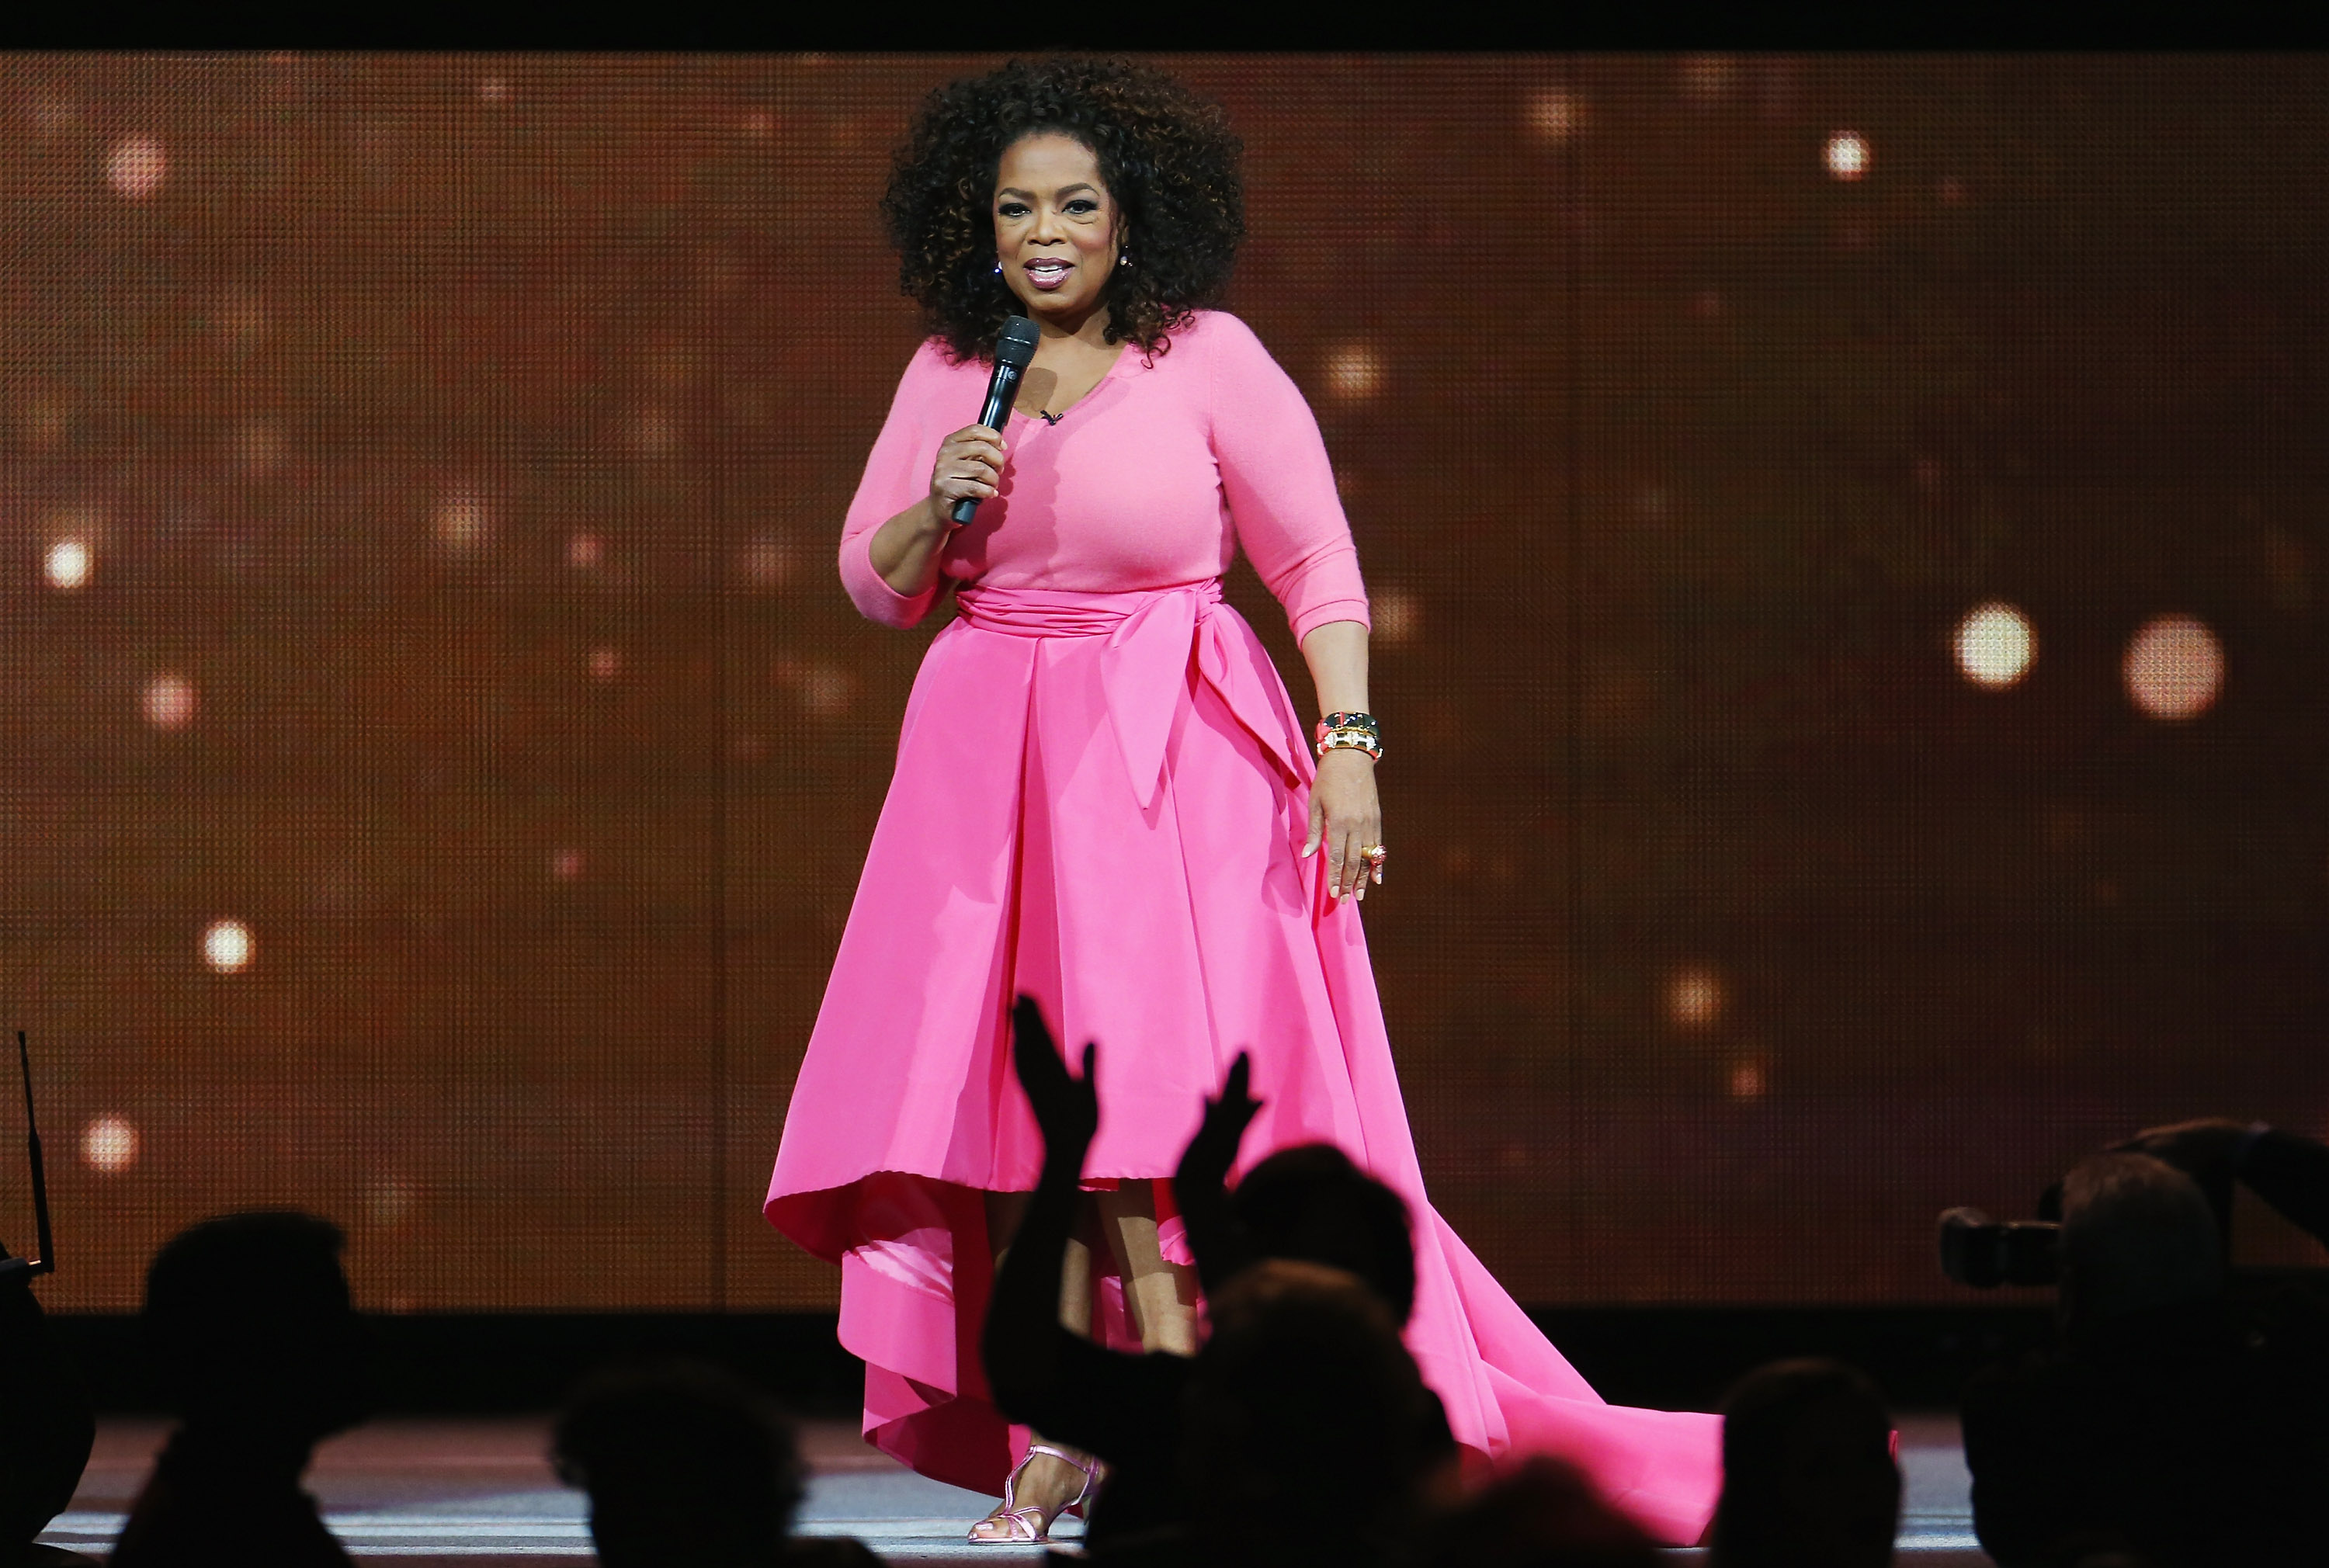 Oprah Winfrey during the "An Evening With Oprah" tour in Sydney, 2015 | Source: Getty Images